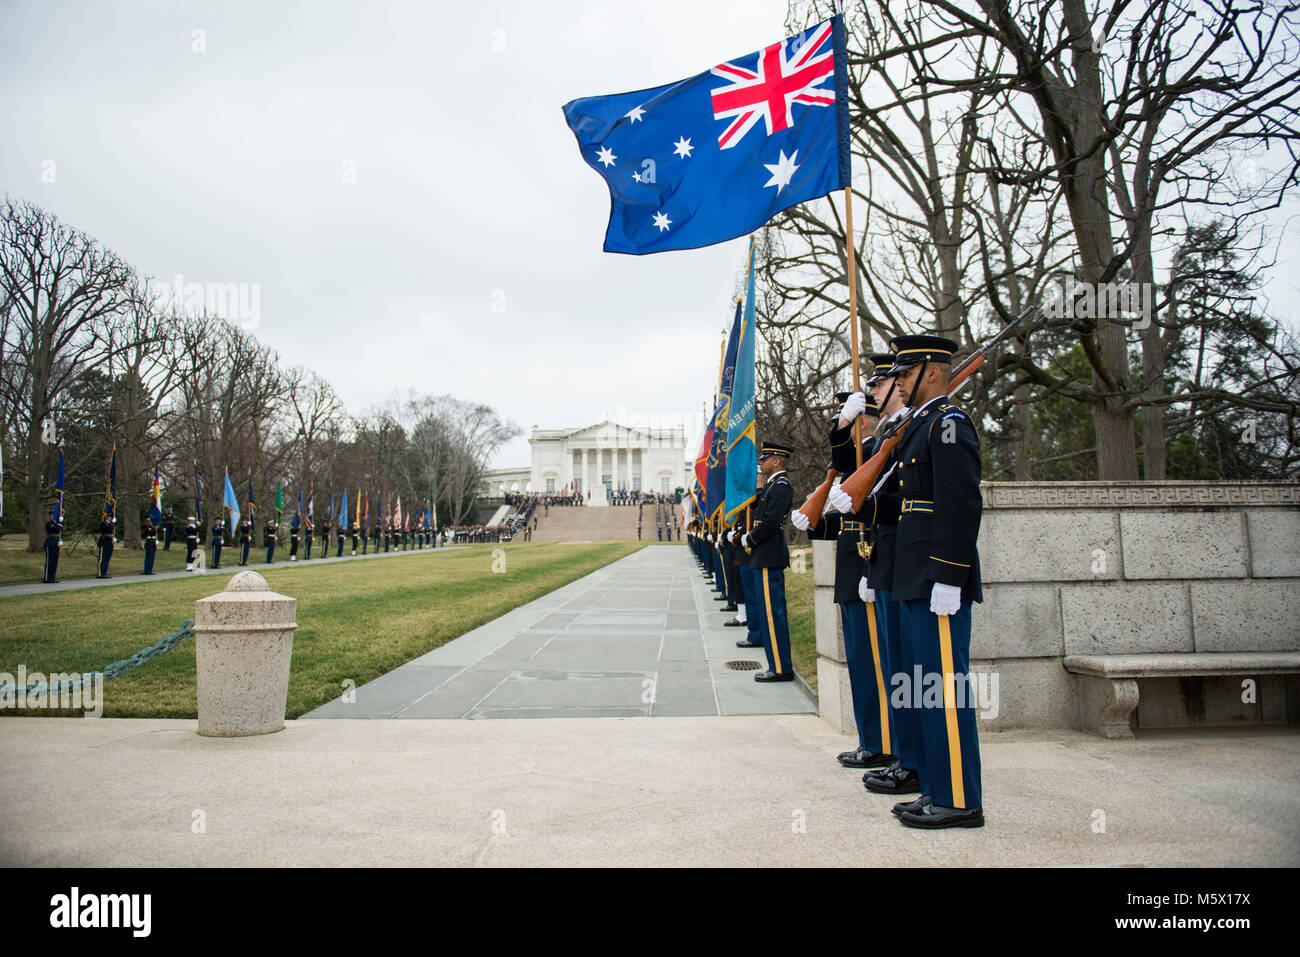 The U.S. Army Color Guard carry the Australian flag during an Armed Forces Full Honors Wreath-Laying at the Tomb of the Unknown Soldier hosted by Australian Prime Minister Malcolm Turnbull at Arlington National Cemetery, Arlington, Virginia, Feb. 22, 2018.    Turnbull met with Arlington National Cemetery senior leadership and toured the Memorial Amphitheater Display Room as part of his official visit to the United States.     (U.S. Army photo by Elizabeth Fraser / Arlington National Cemetery / released) Stock Photo